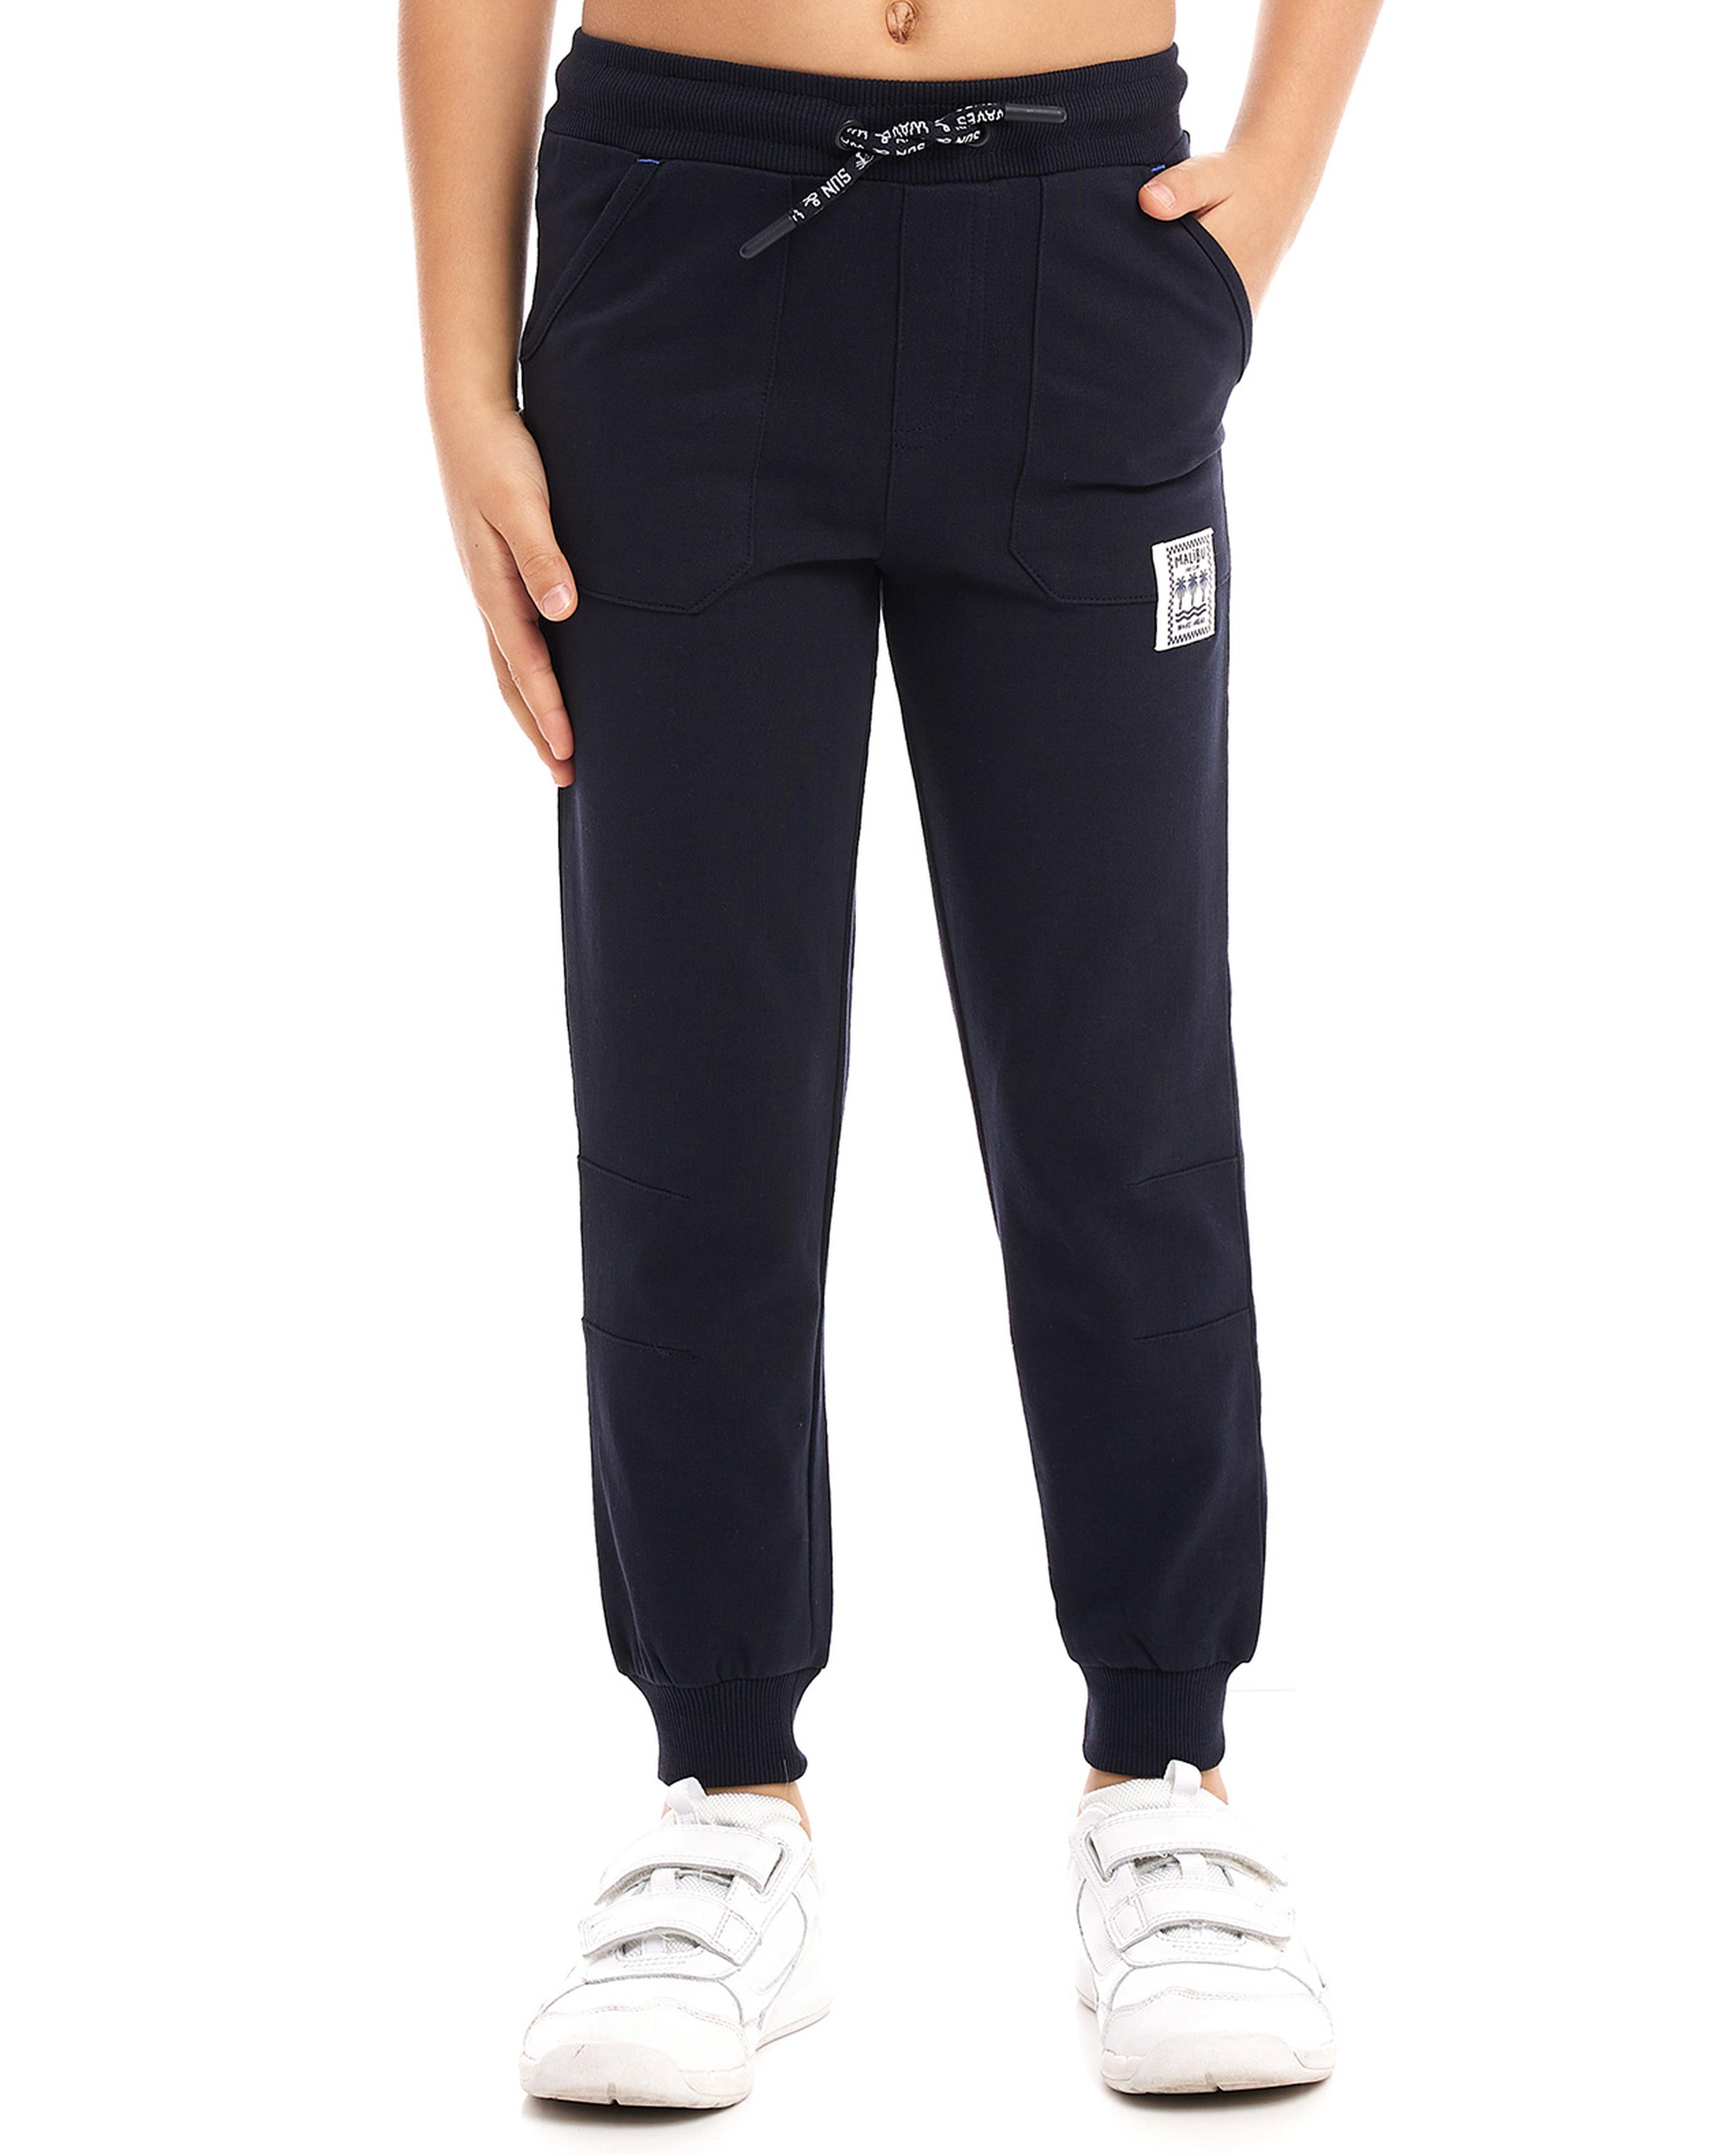 Label Detail Joggers with Drawstring Waist